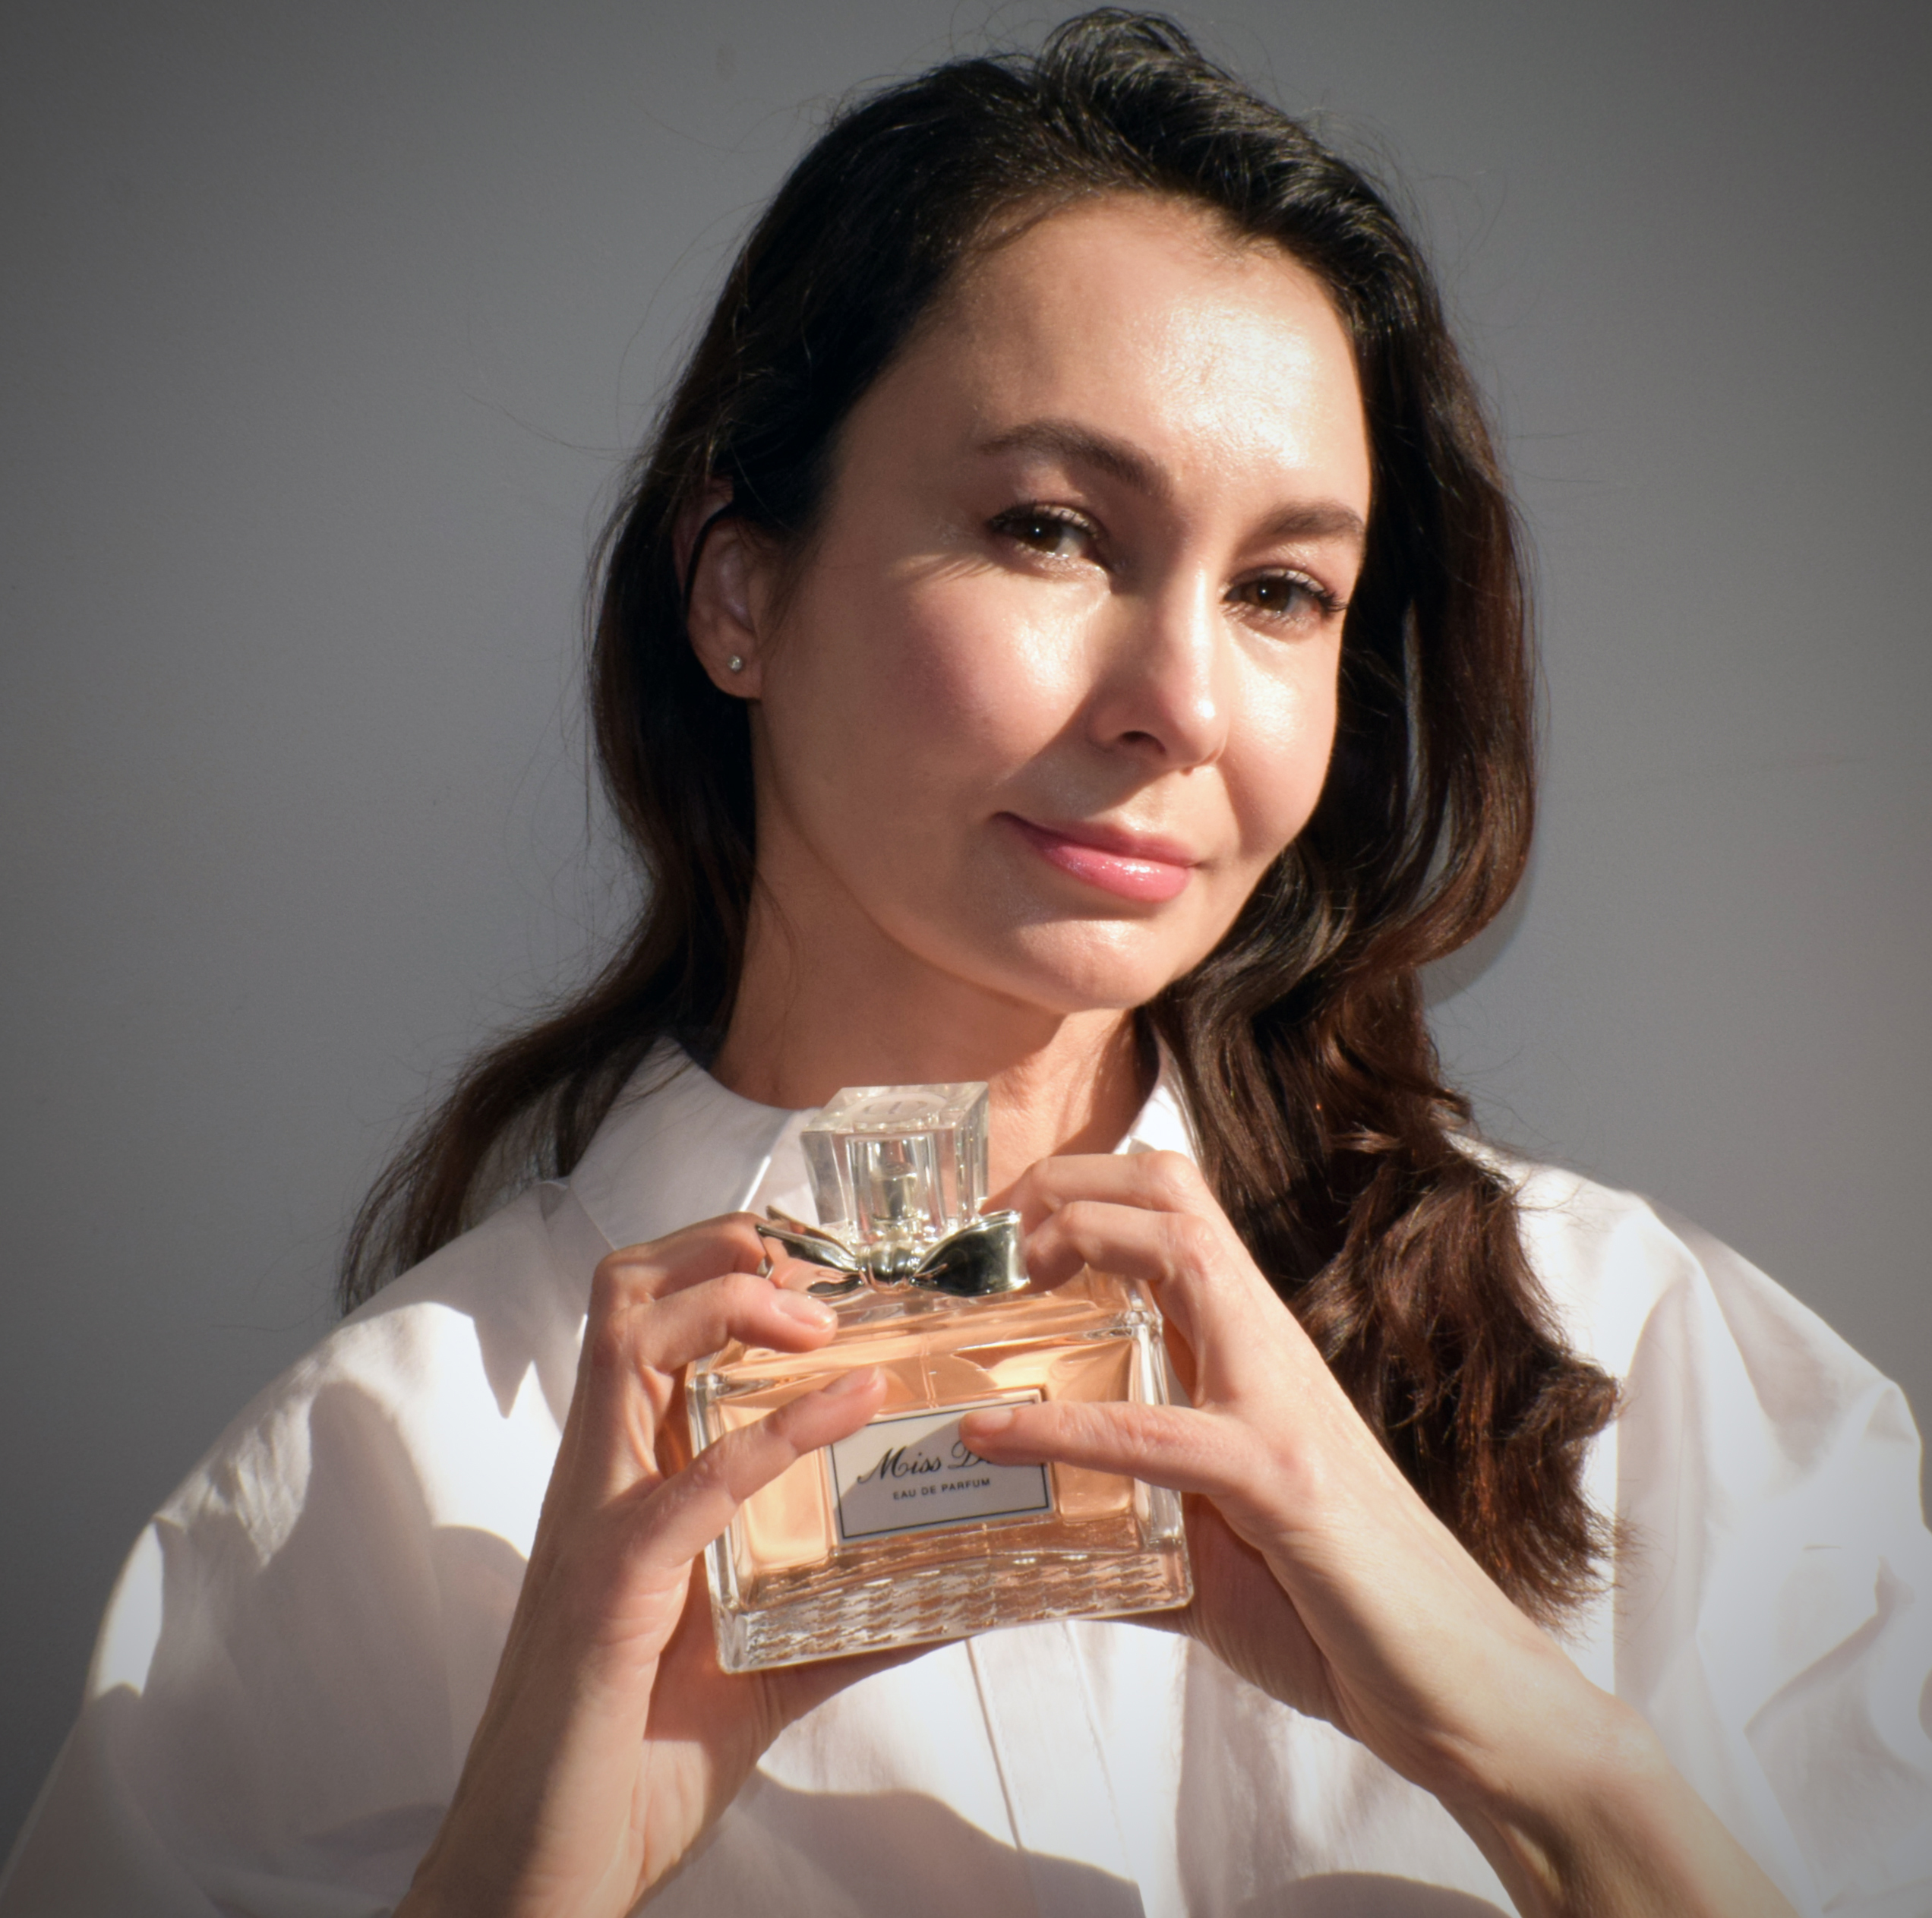 Oxana with her favourite perfume